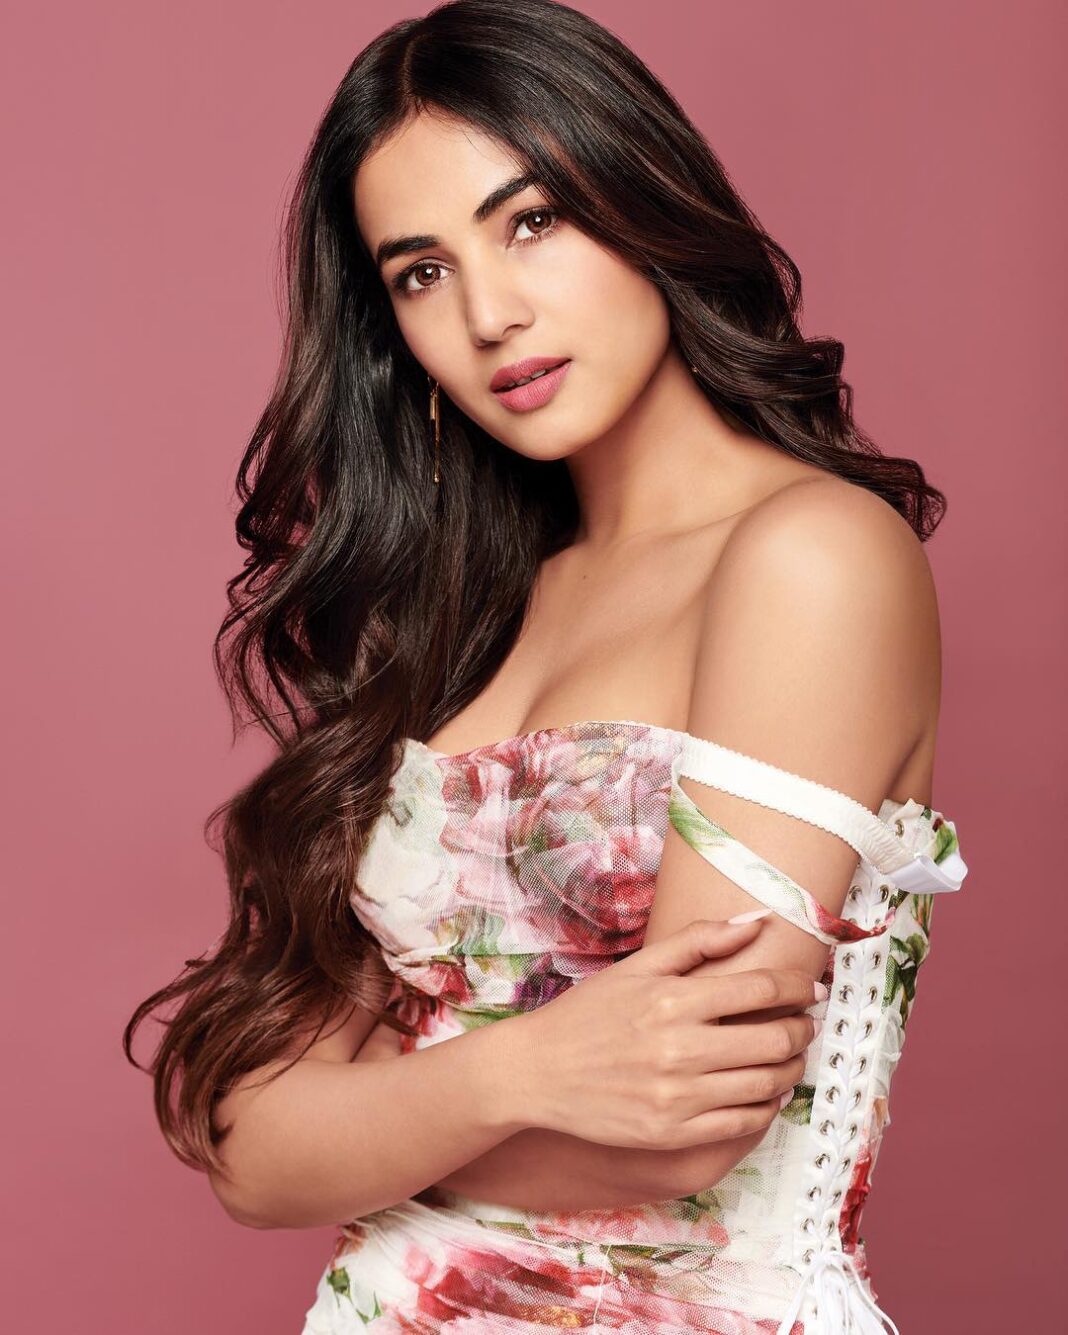 Sonal Chauhan Instagram - Twice i would die, for a little more once with you 🌸🌸🌸 . . . . . Photographer- @prabhatshetty Hair and make up- @vijaysharmahairandmakeup Outfit- @dolcegabbana Styled by- @d_devraj @d_squaddd #portraitphotography #portrait #floraldreams #dolcegabbana #eyes